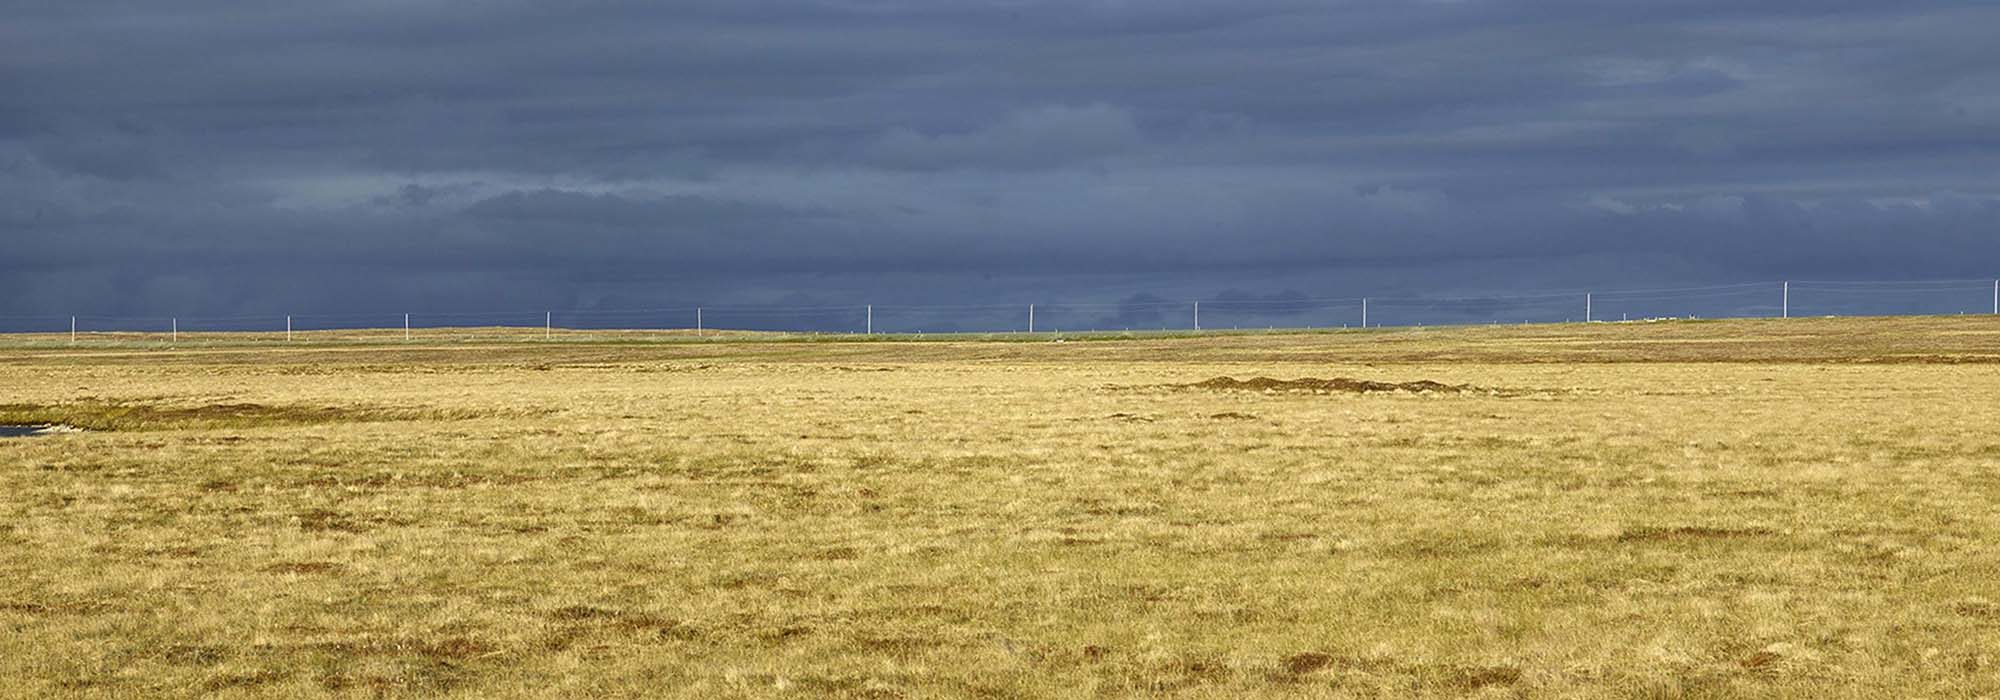 Ned Pratt's Route 10 depicts a stormy sky hovering over a yellow grassy field. A fence bisects the field's horizon.